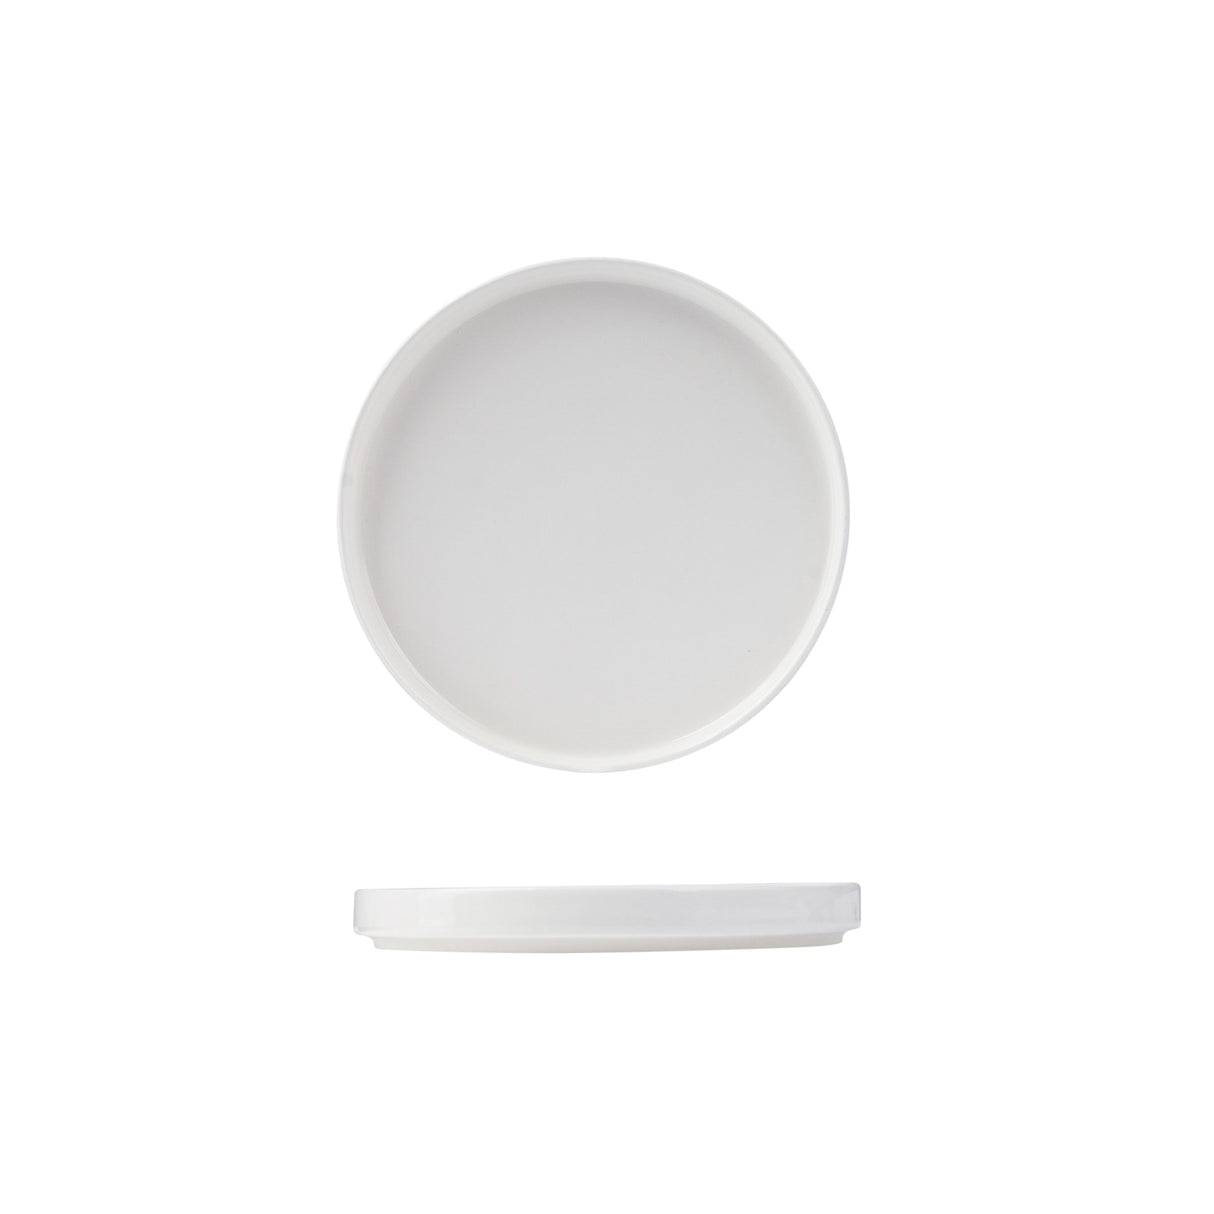 Low Plate - 200Mm, Stackable: Pack of 6